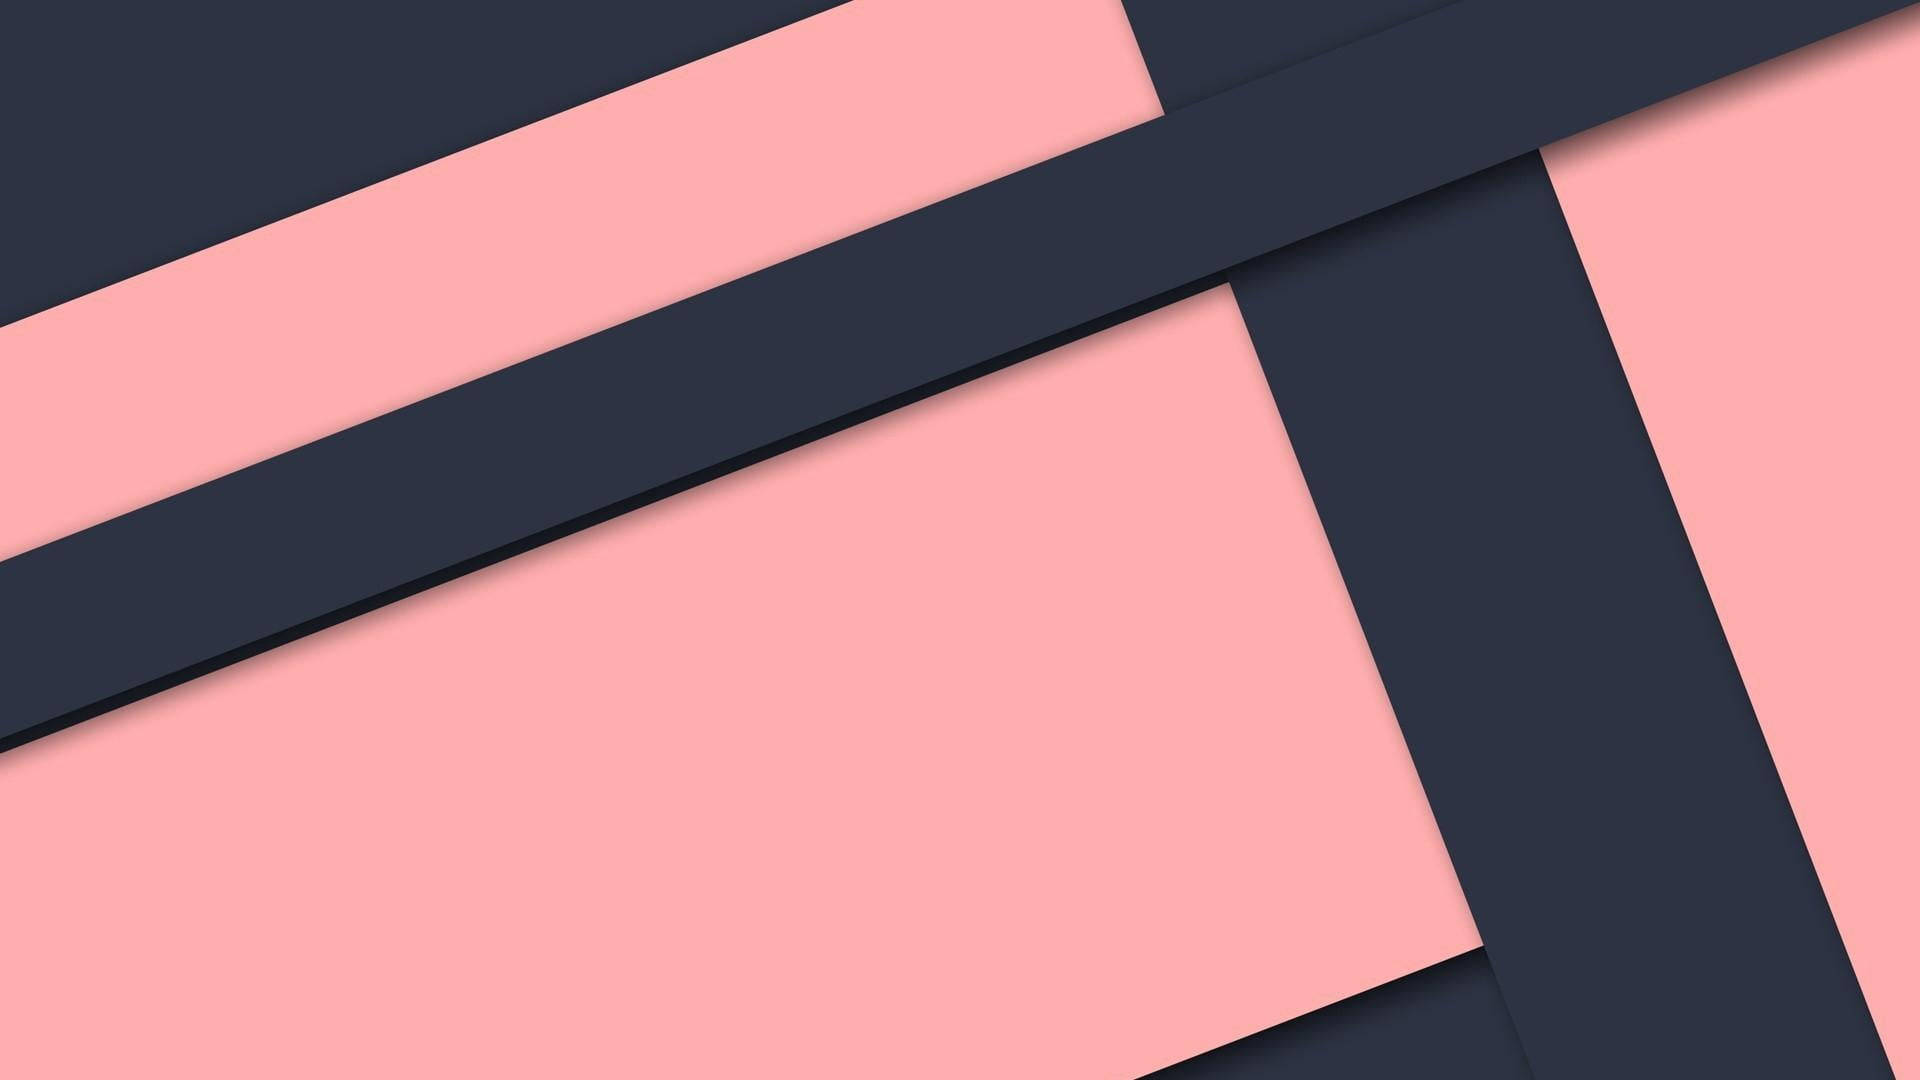 Black And Pink Aesthetic Material Design